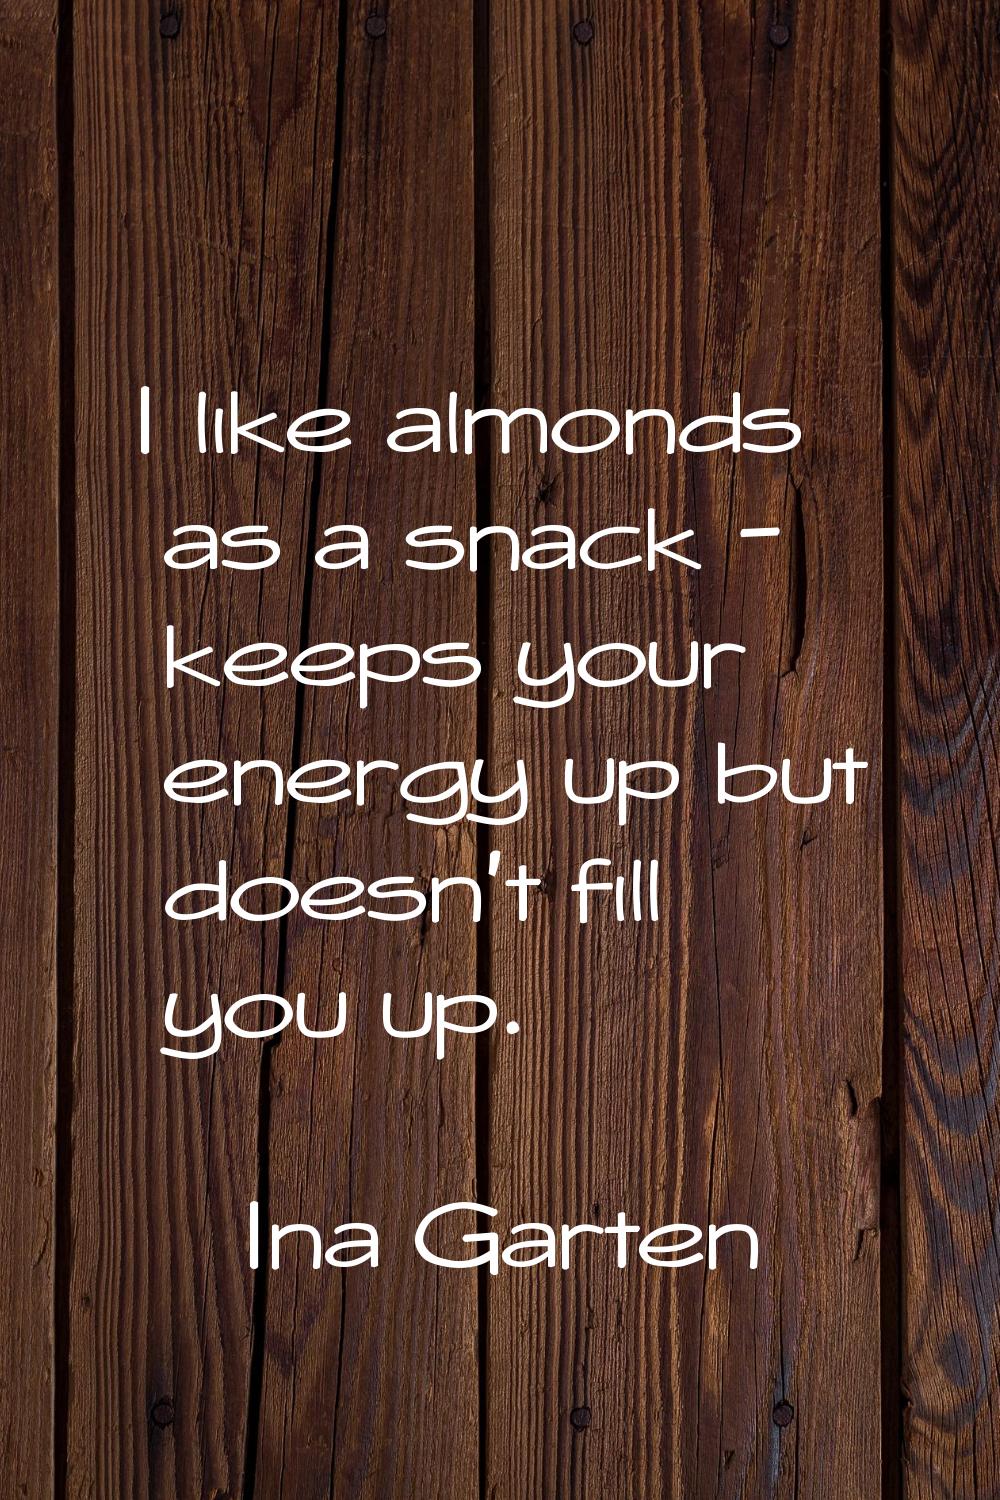 I like almonds as a snack - keeps your energy up but doesn't fill you up.